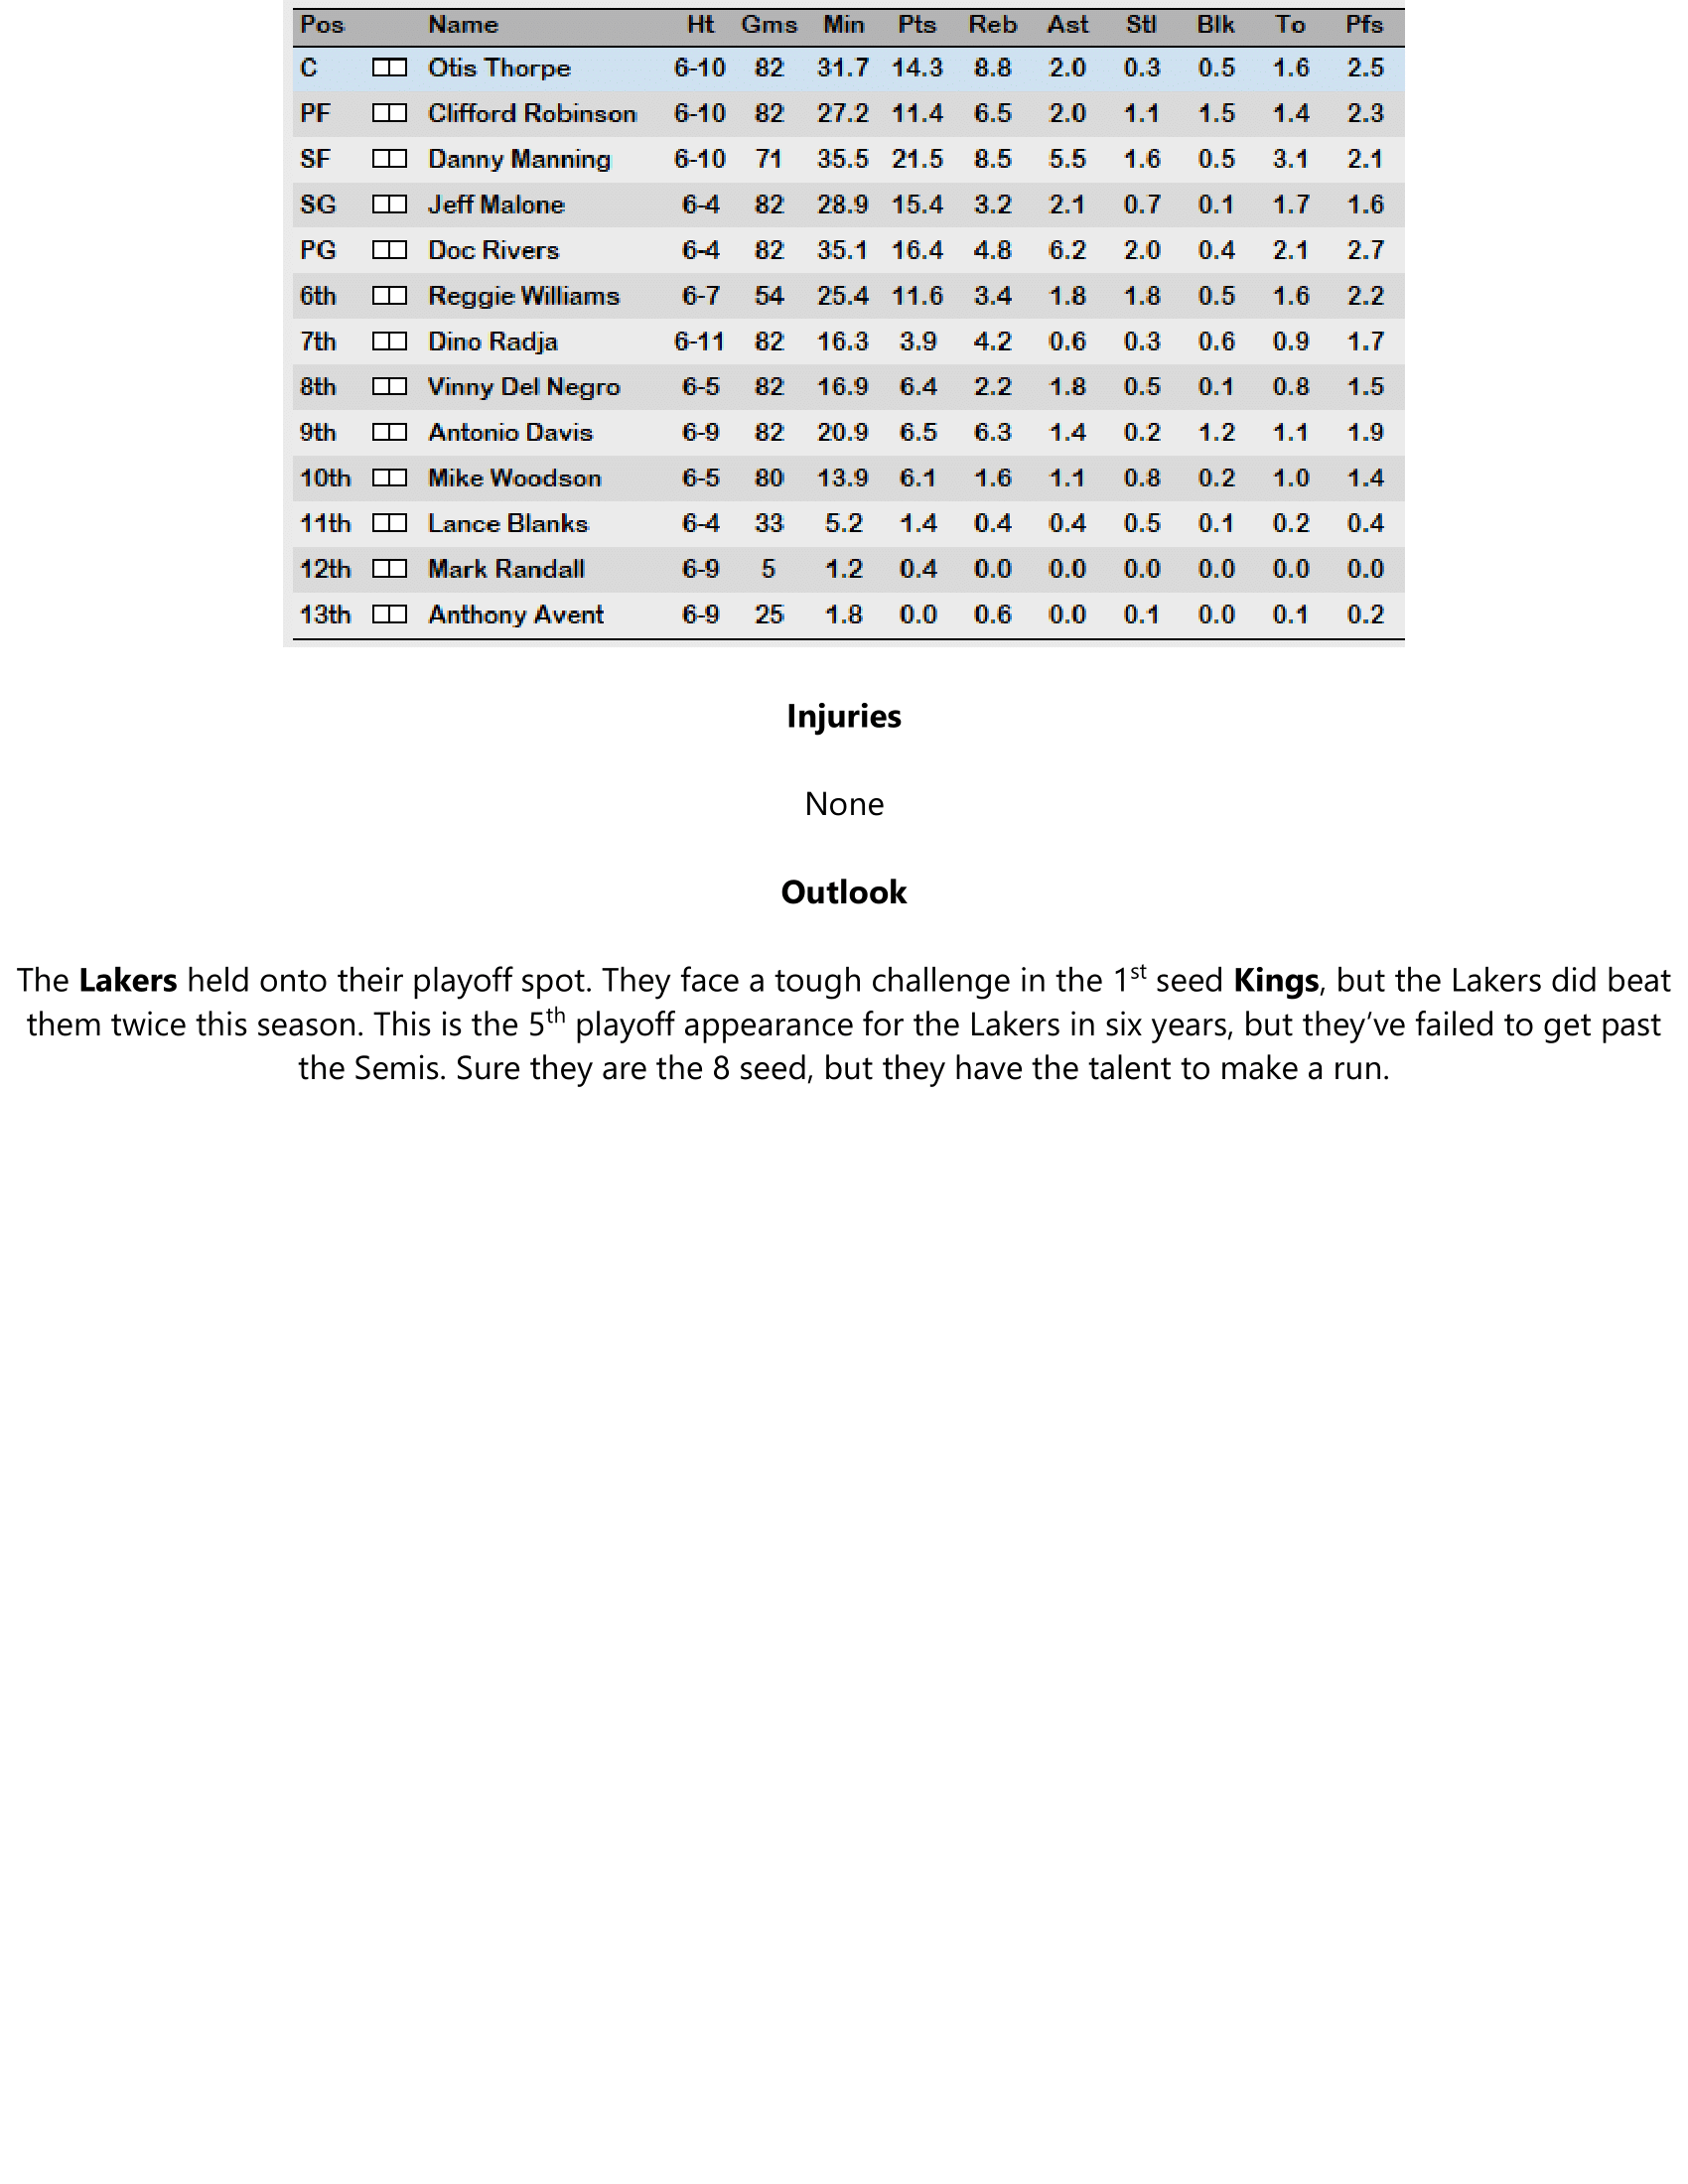 91-92-Part-4-Playoff-Preview-13.png